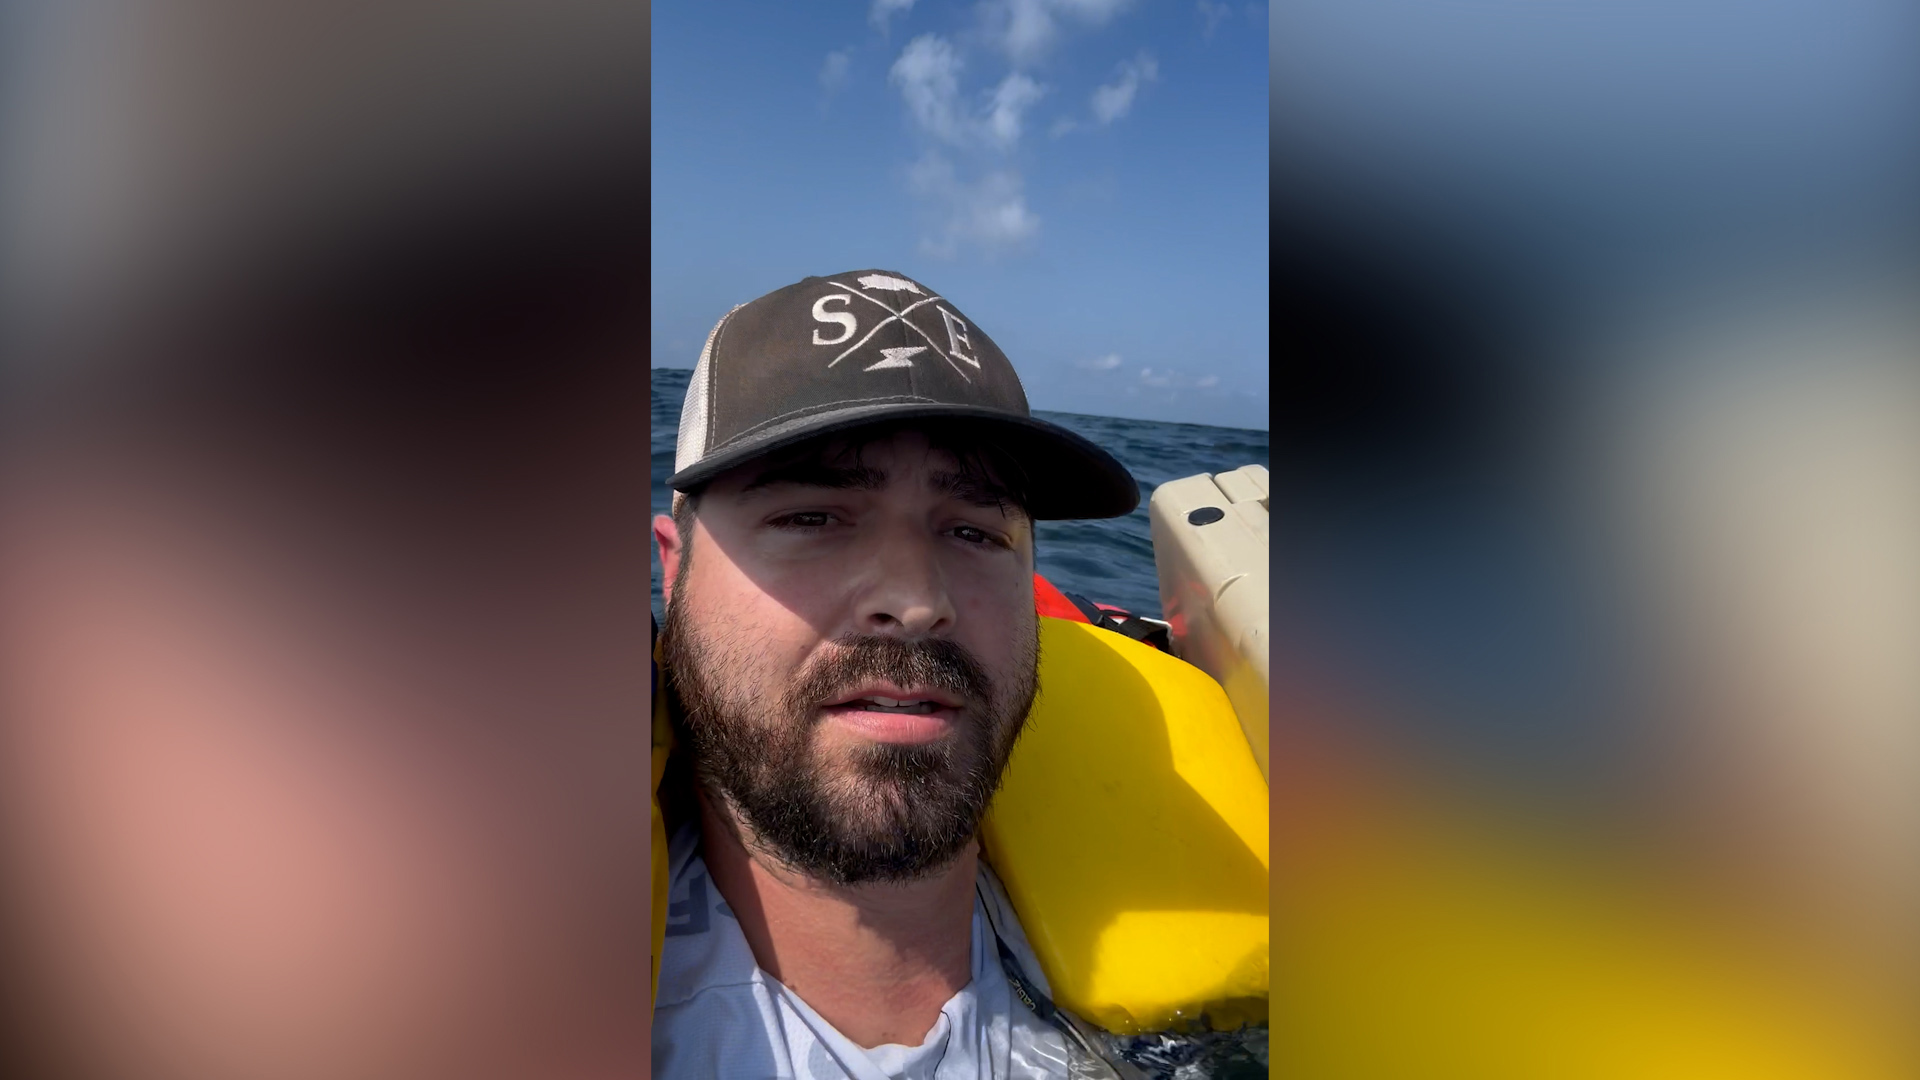 A 'last message' from Biloxi boater Easton Barrett has been seen on TikTok by more than 5 million when posting boat sinking, rescue after 4.5 hours in water.